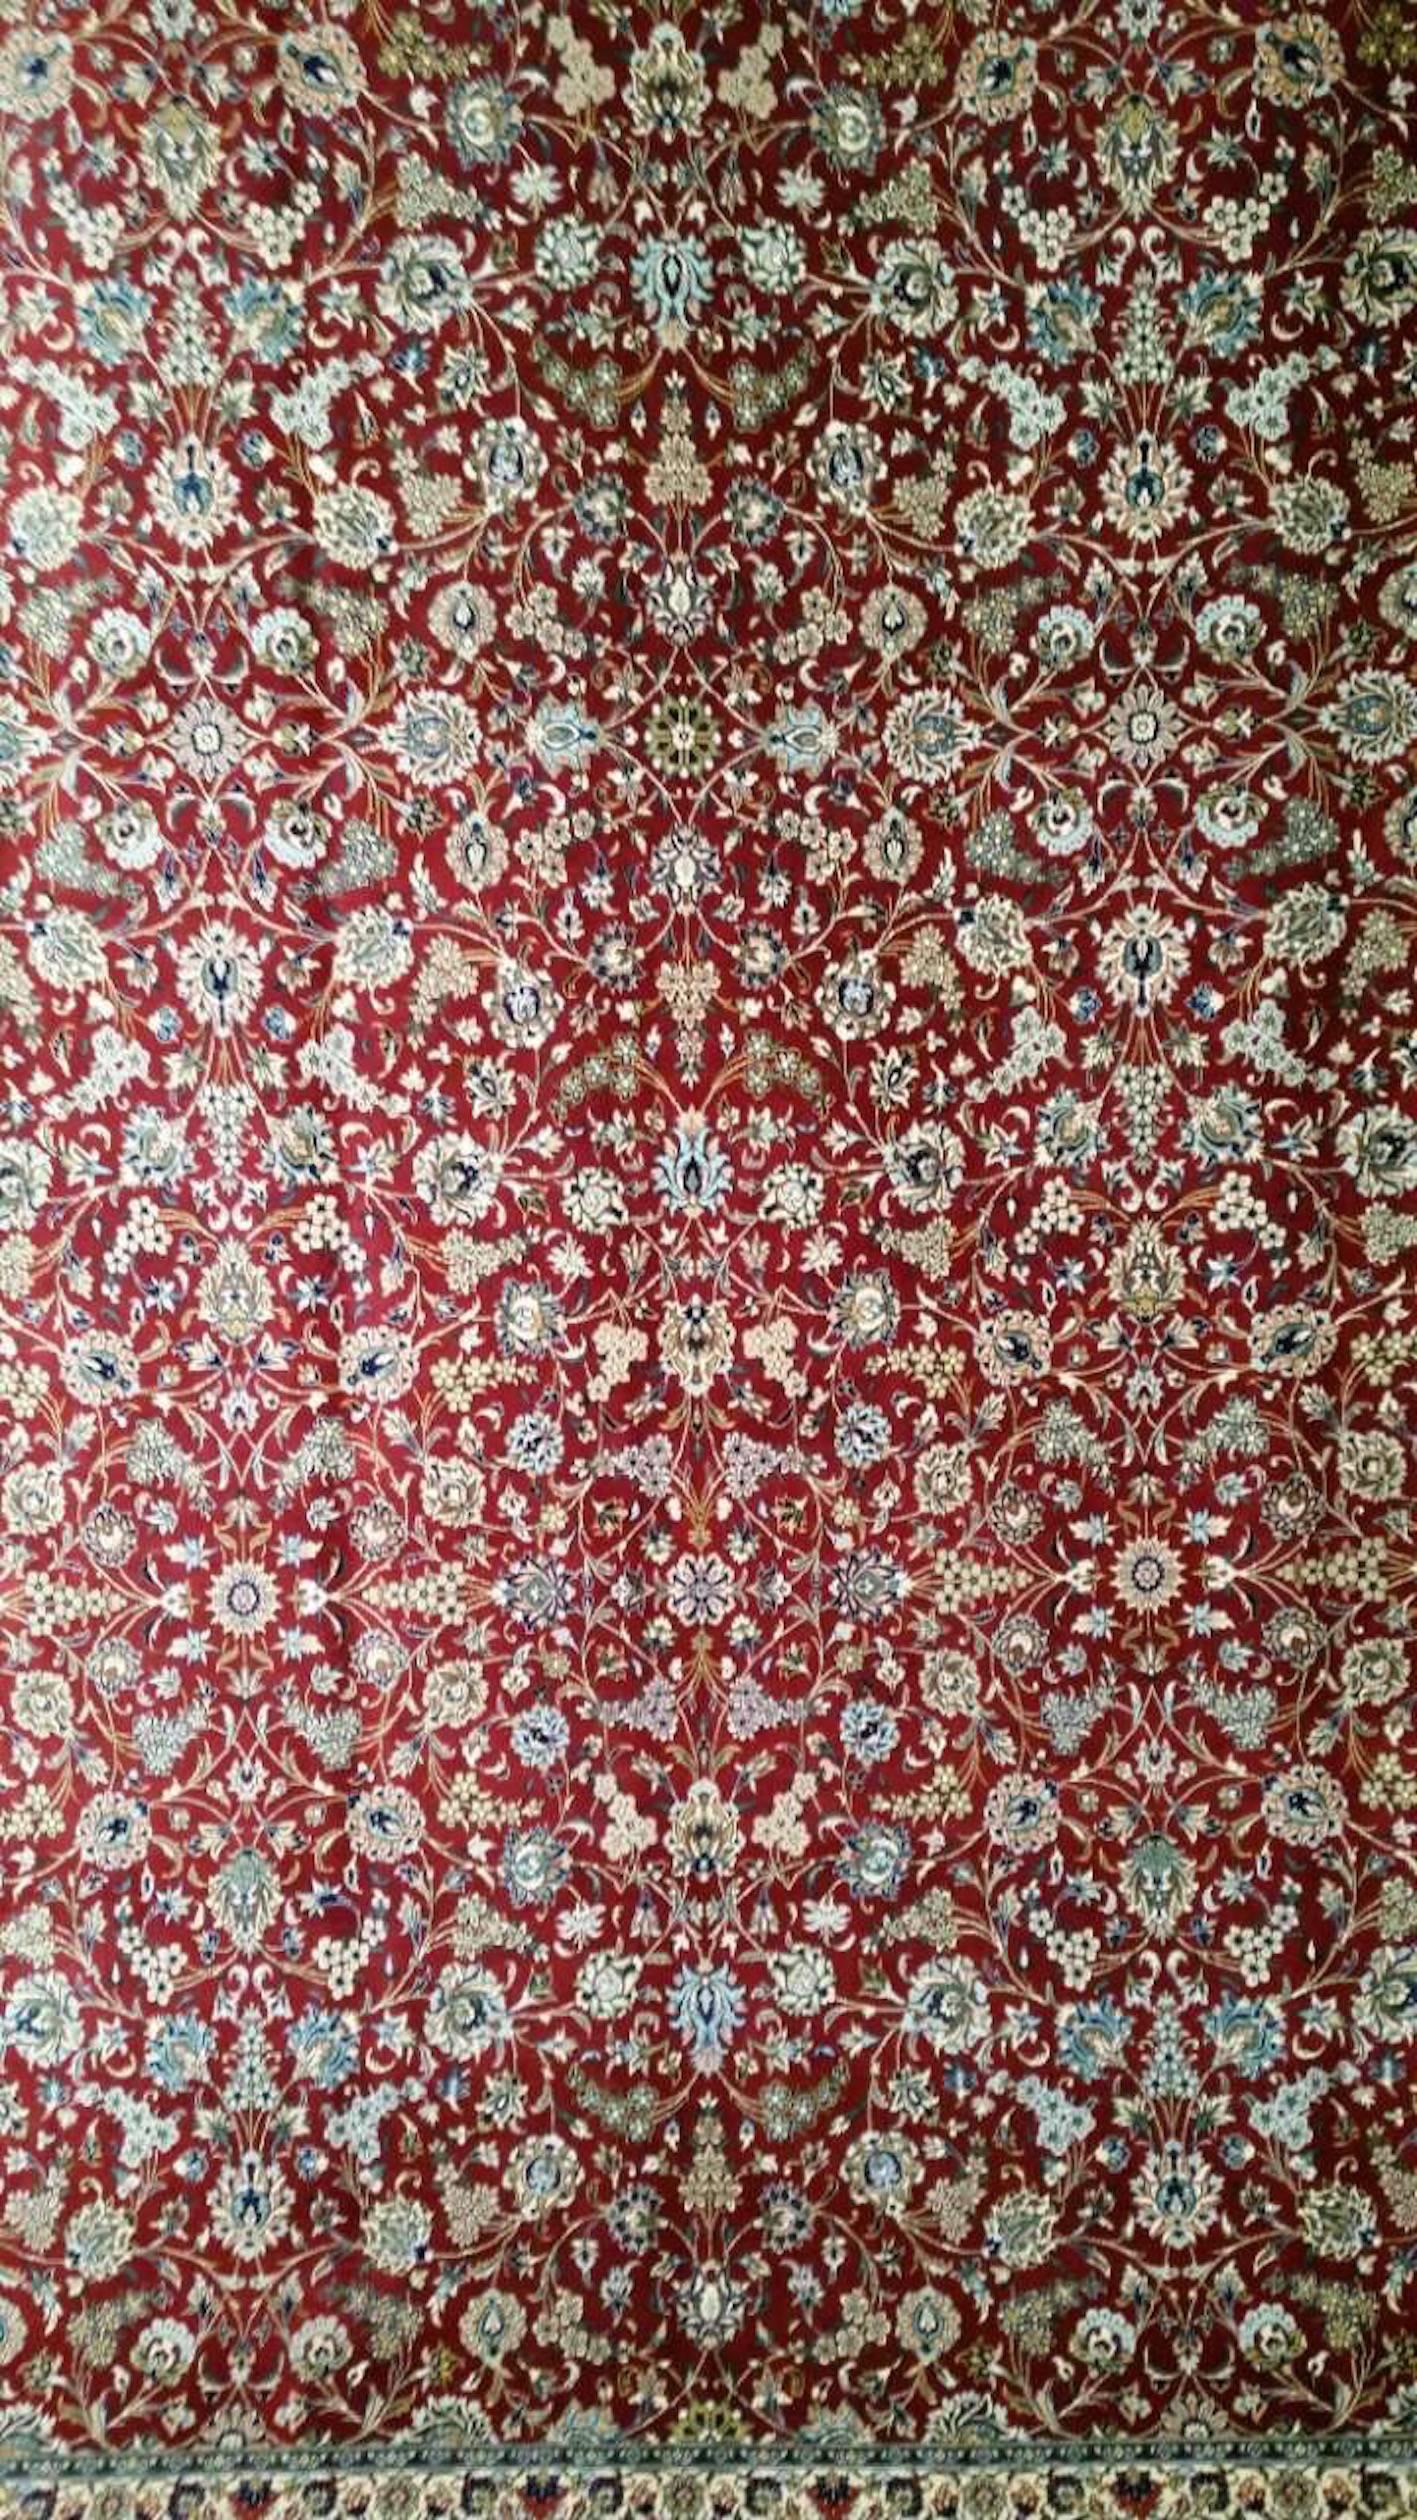 Qom rugs are made in the Qom province of Iran, around 100 km south of Tehran. Although rug weaving in Qom was not a major industry until the past 100 years, the luxurious silk and wool rugs of Qom are known for their high quality and are regarded